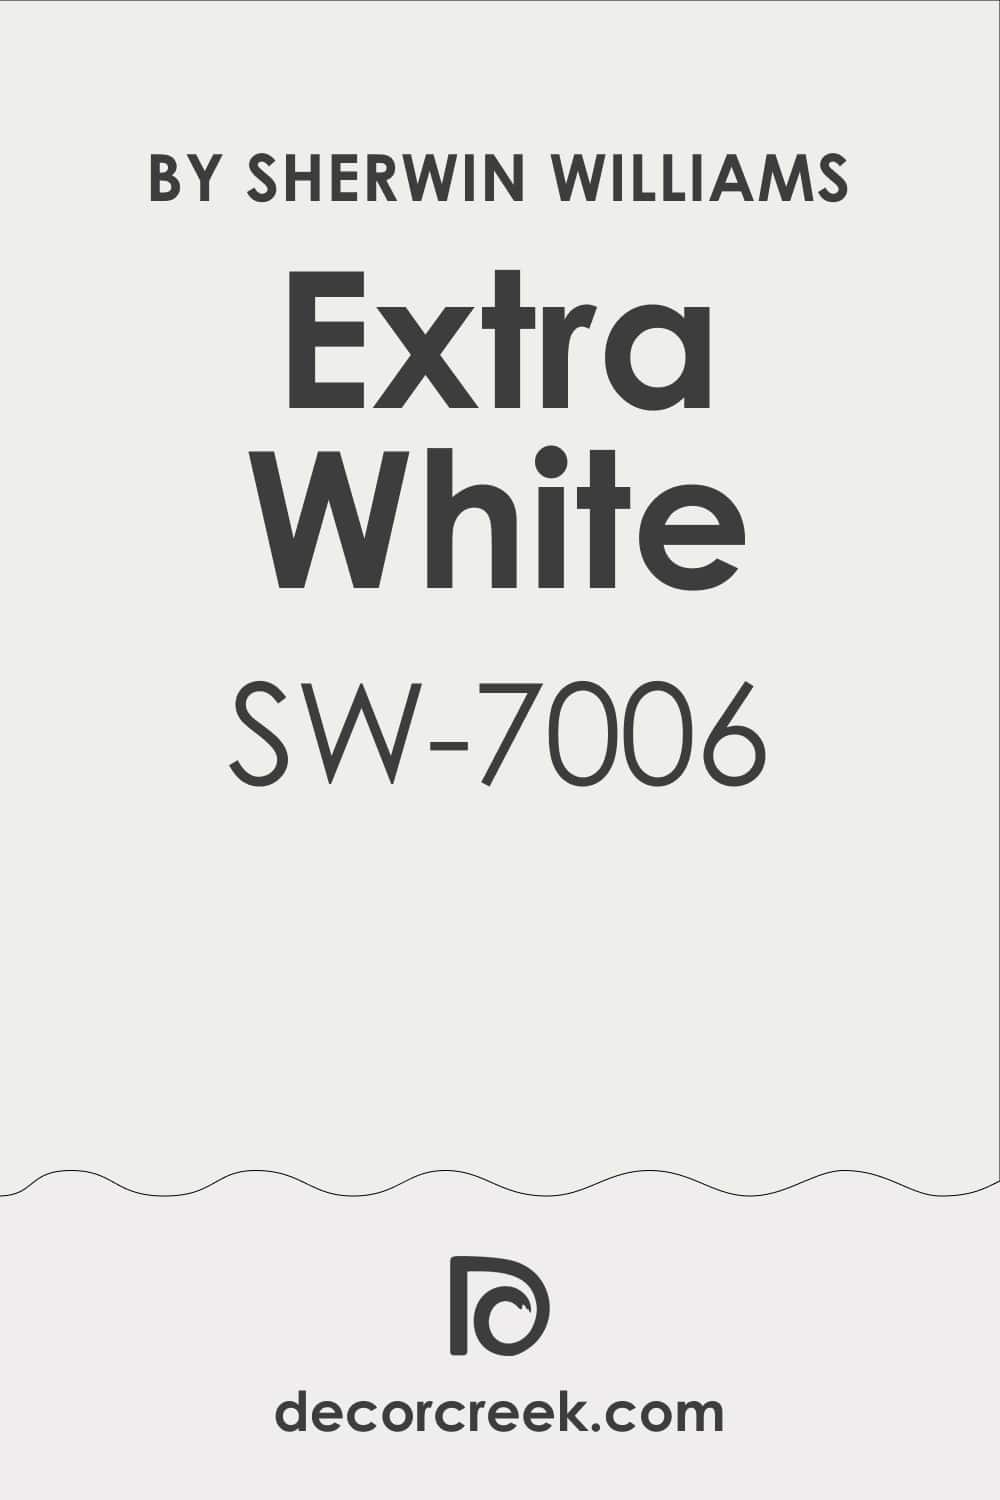 Extra White SW-7006 by Sherwin-Williams. What Kind Of Color Is It?